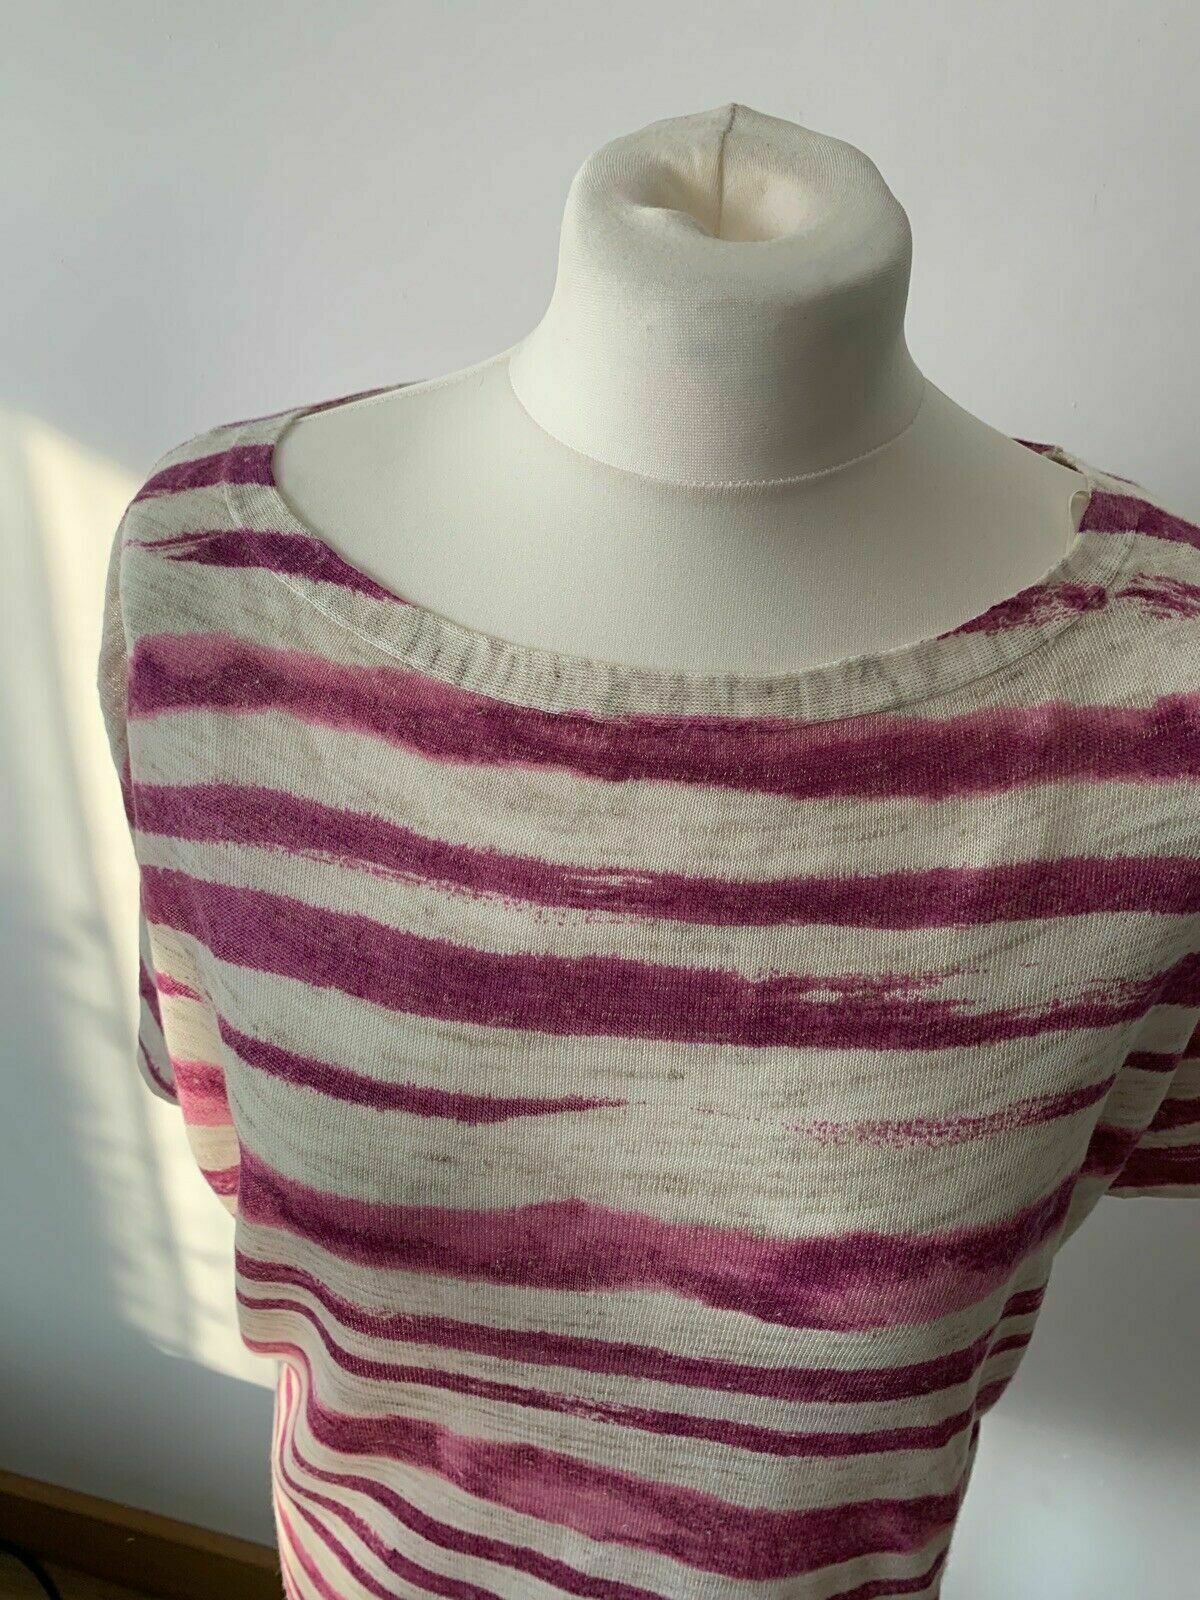 Monsoon Linen Blend Knit Top Pink And Beige Size Small